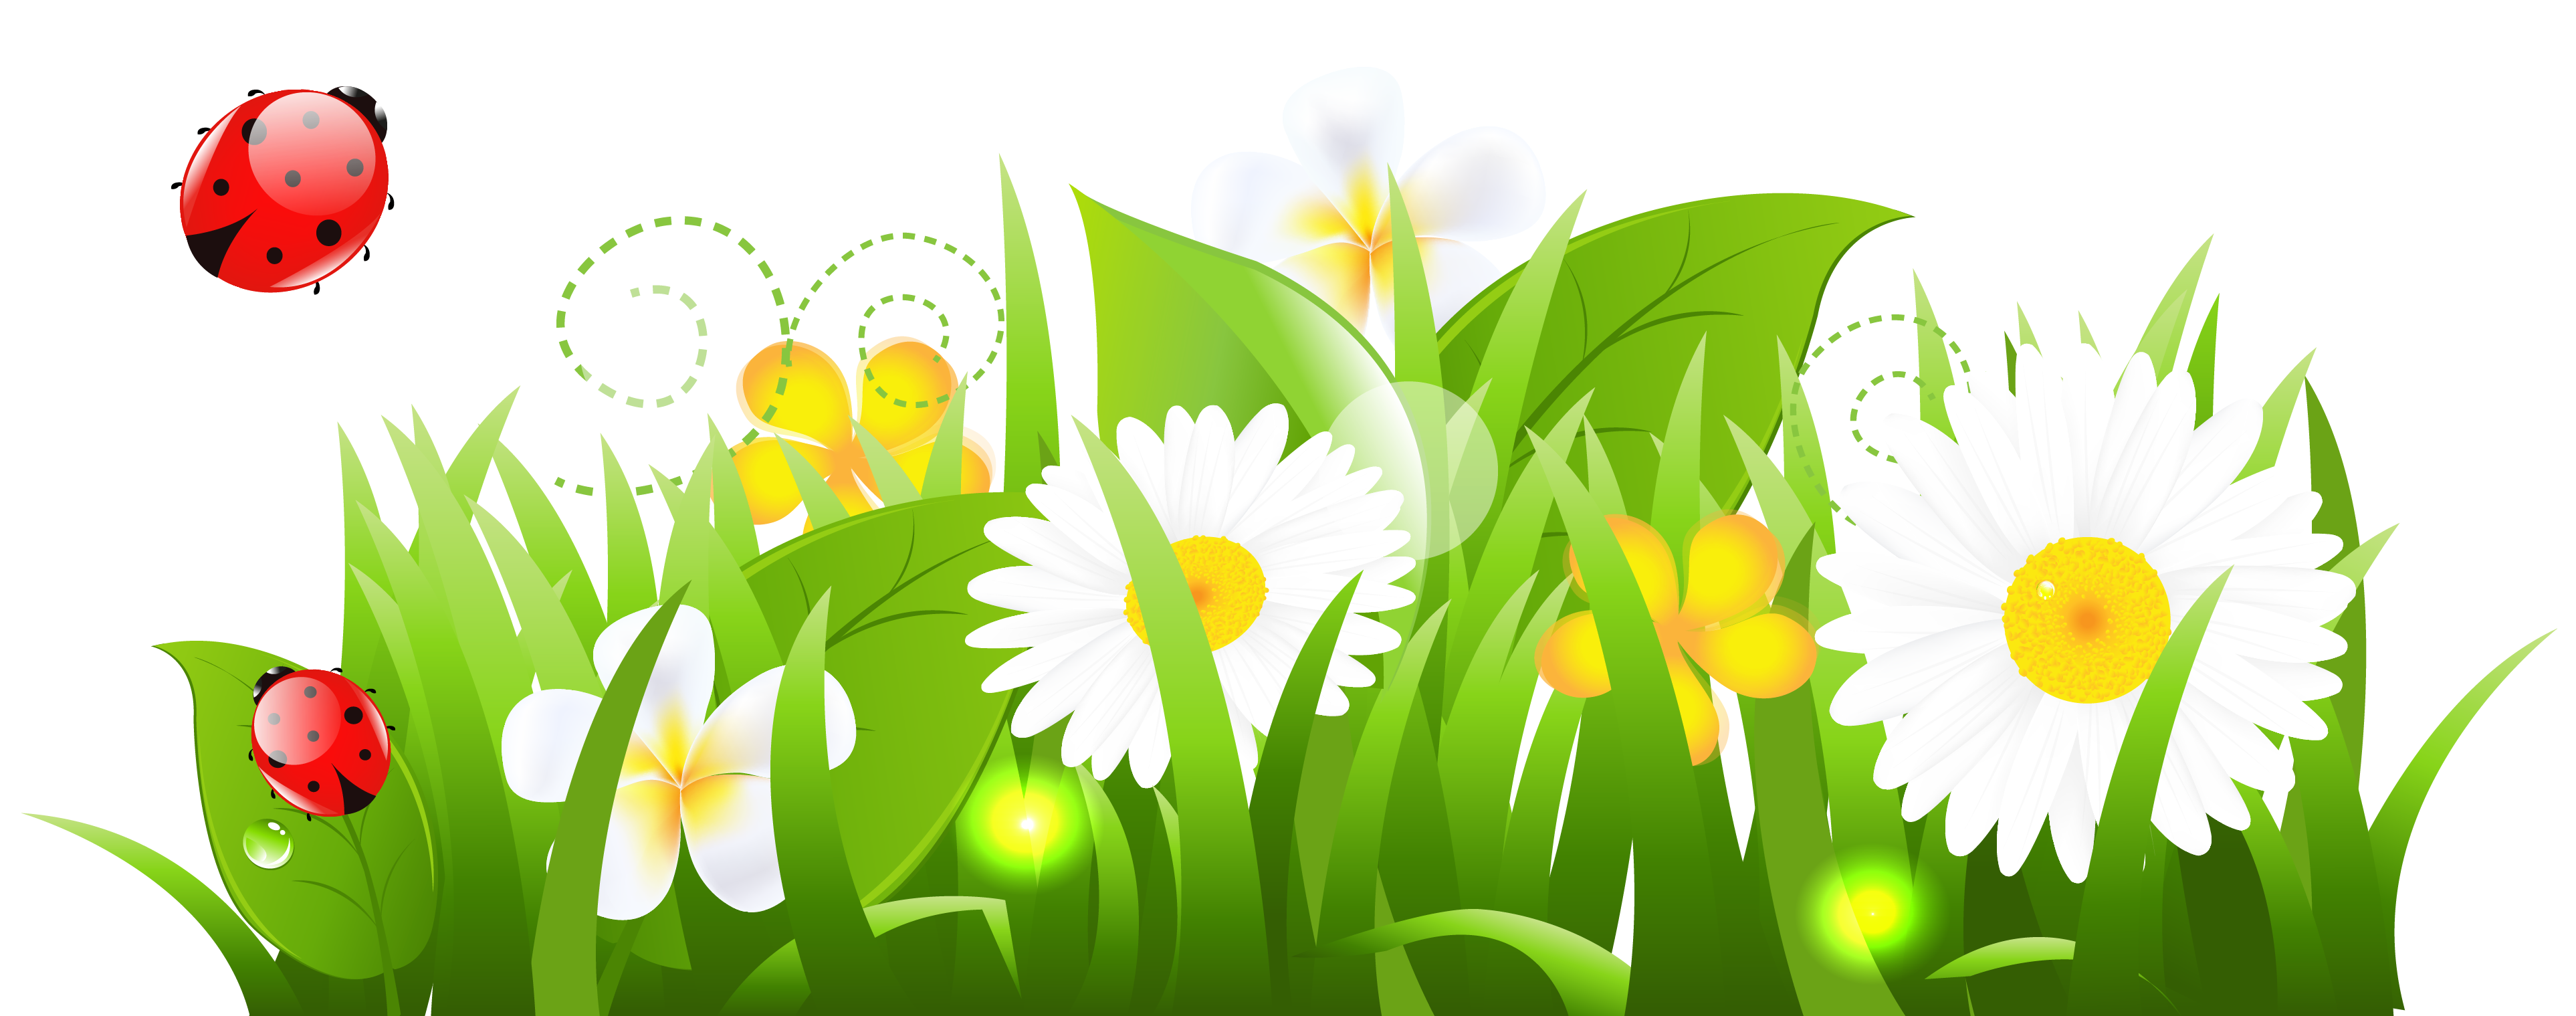 free animated clip art of flowers - photo #39